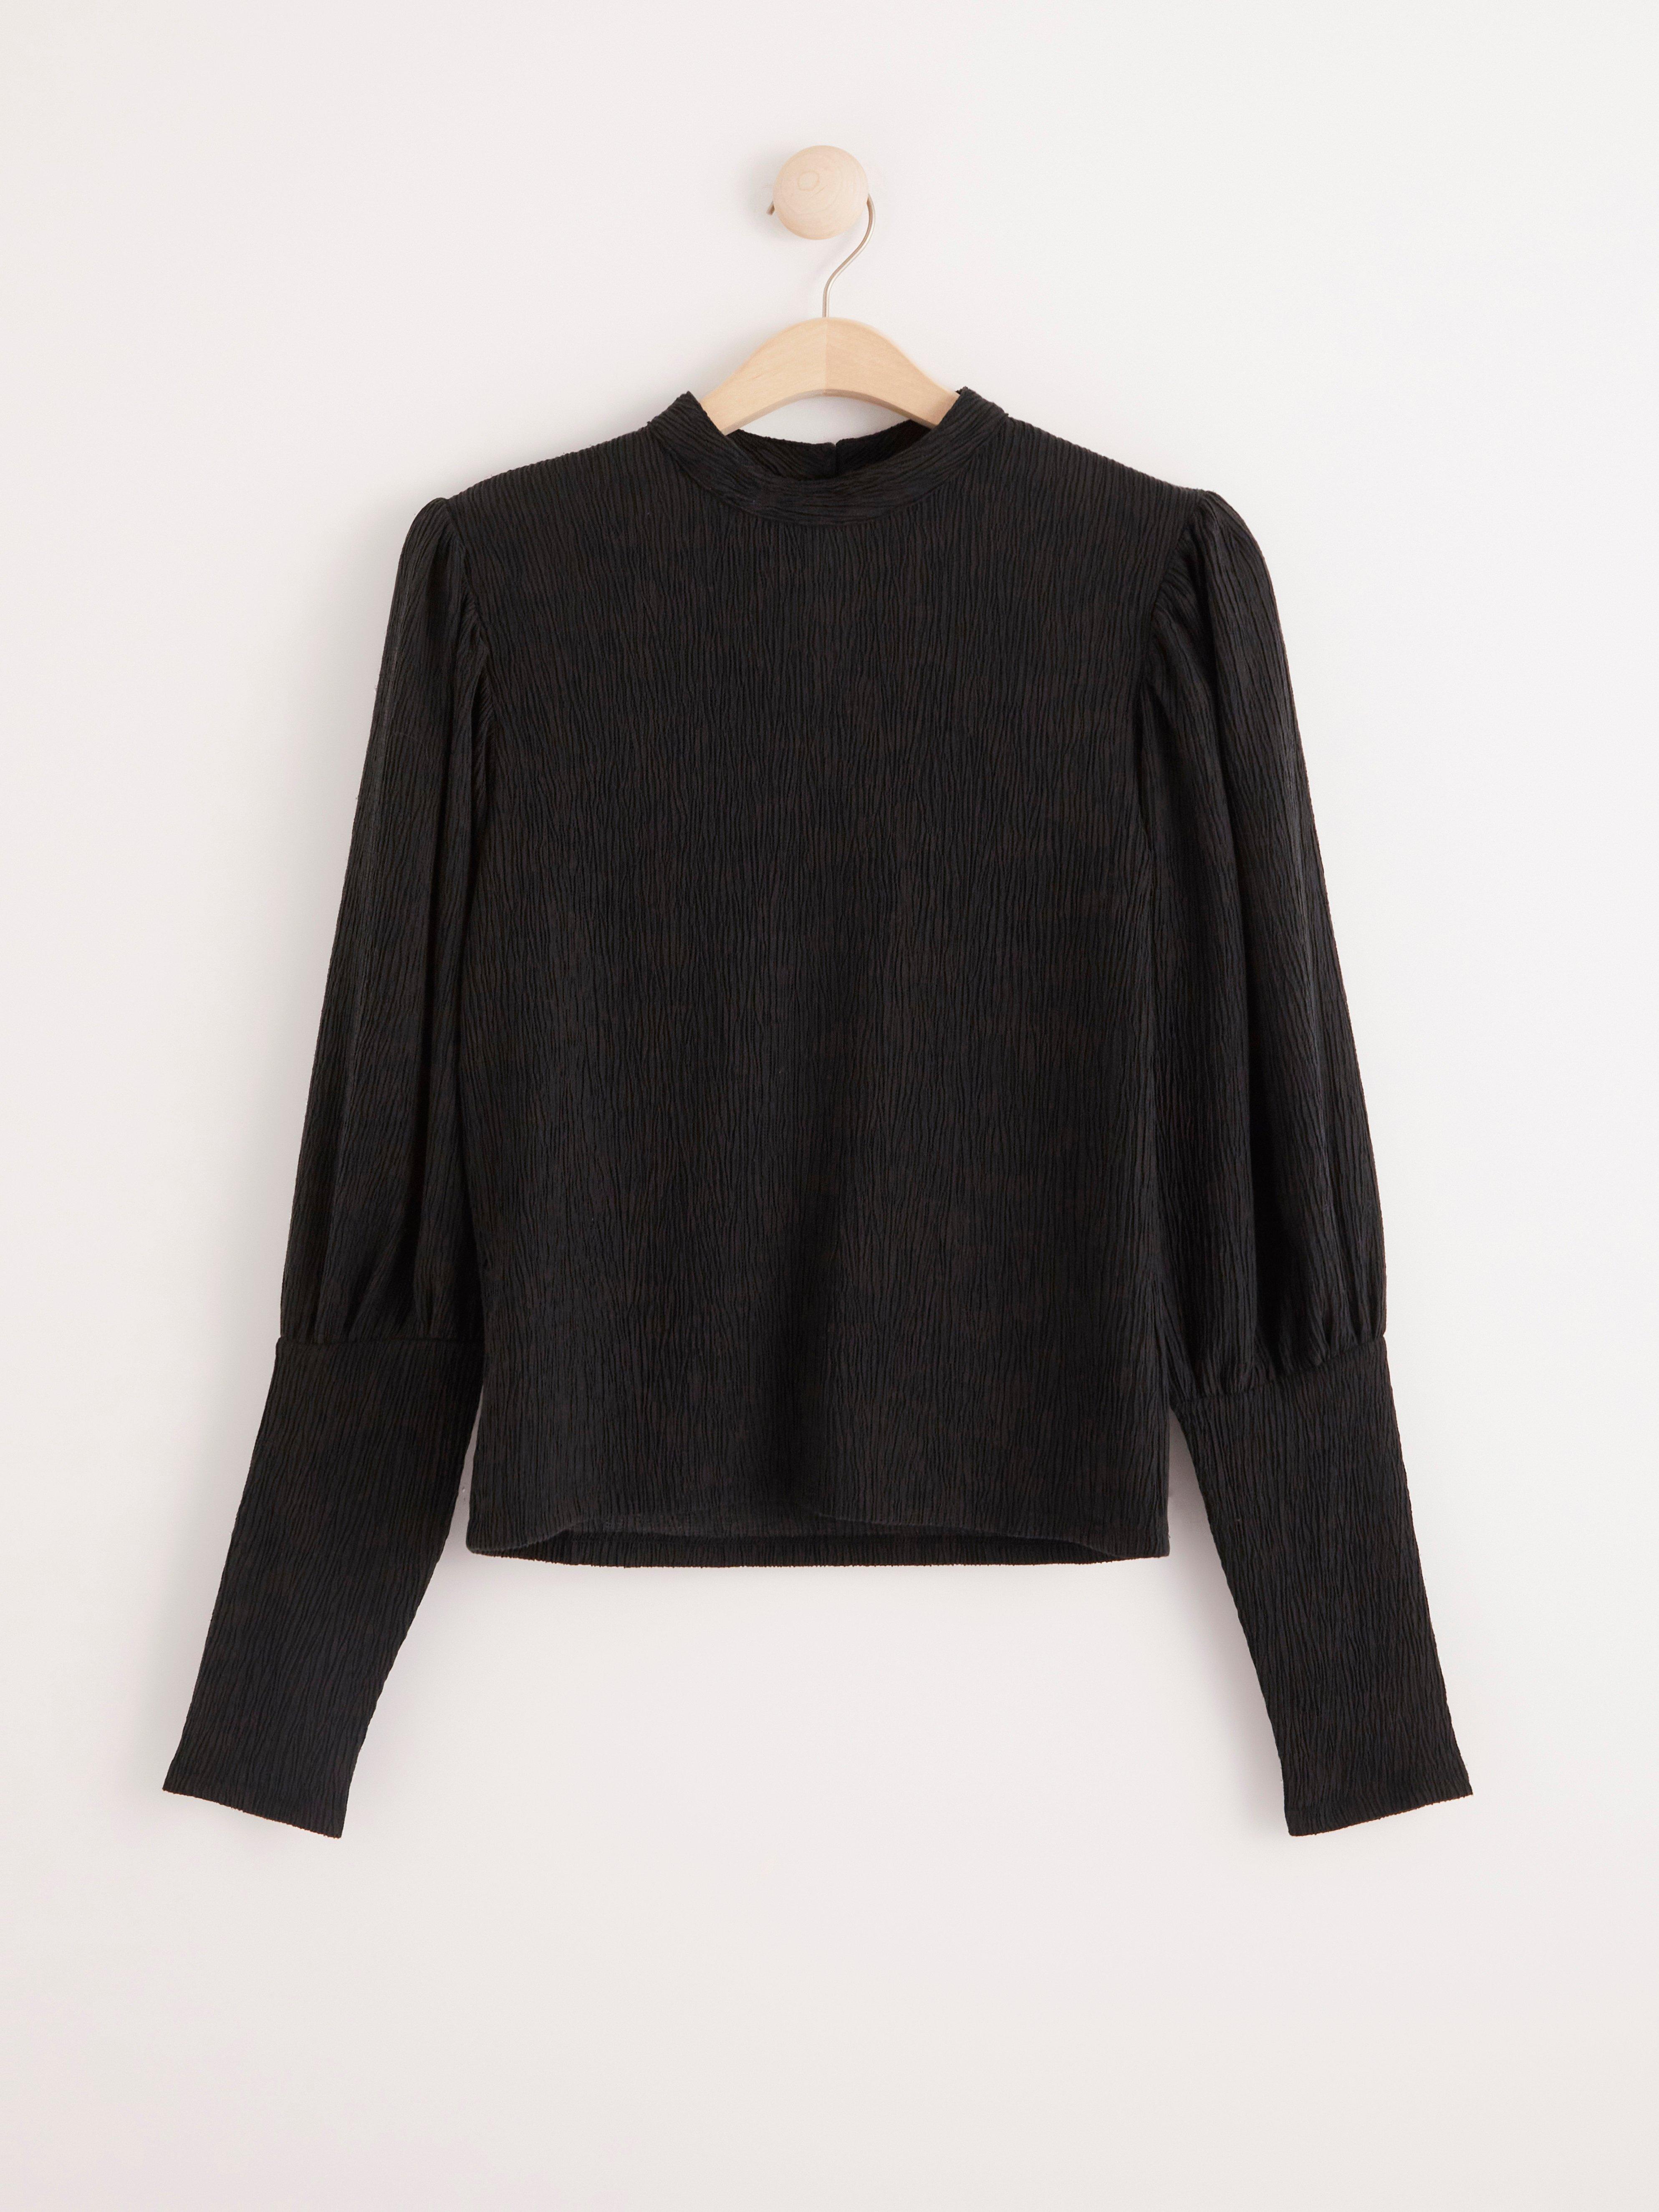 Textured top with puff sleeves | Lindex Estonia